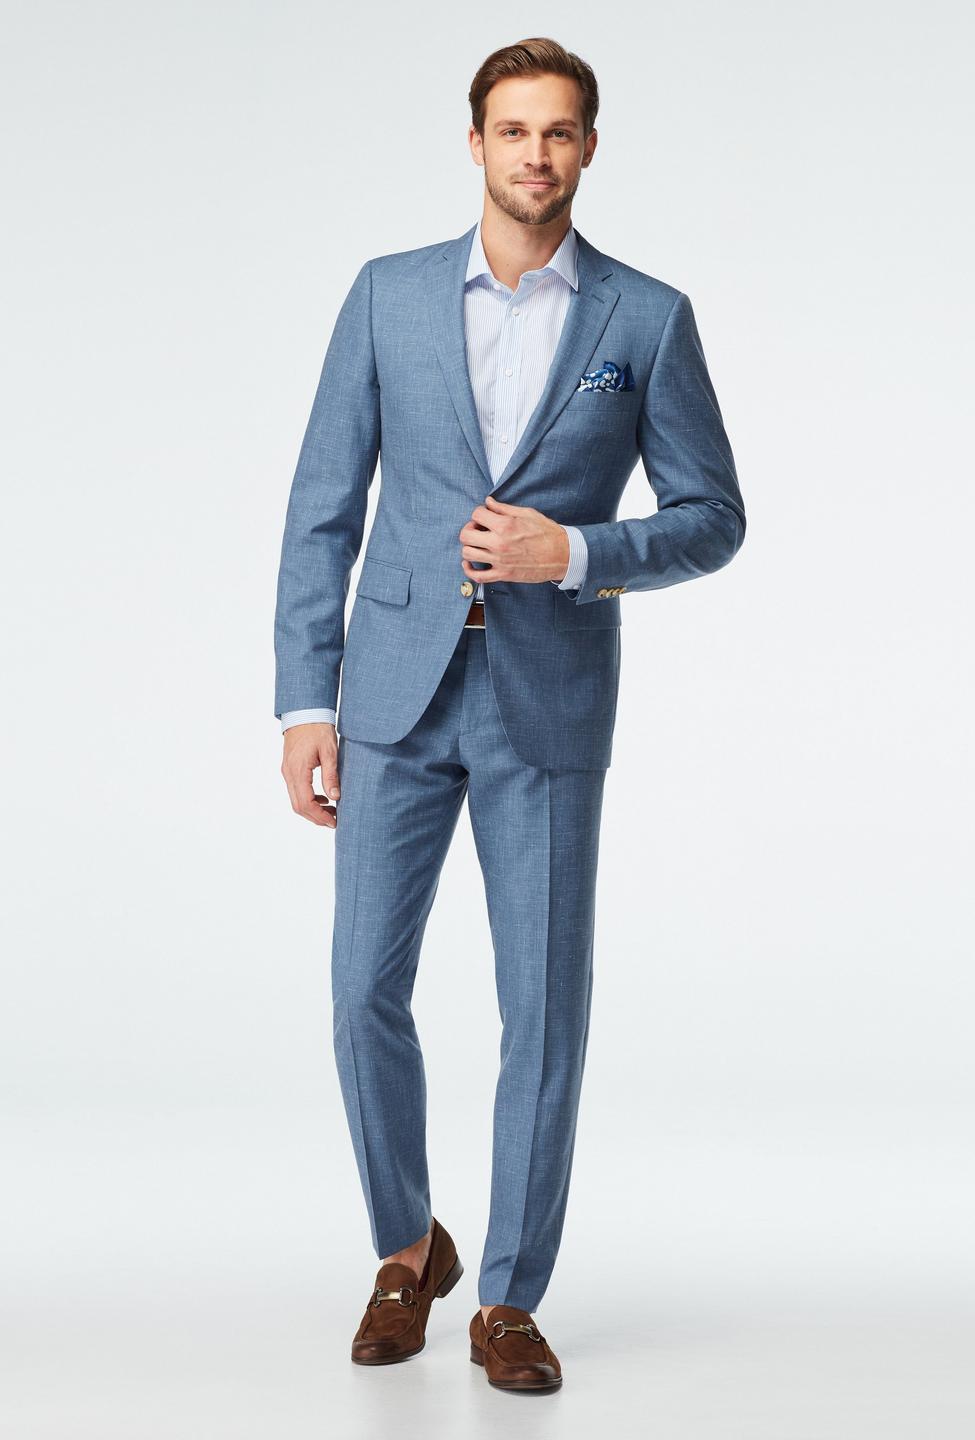 Blue suit - Stockport Solid Design from Seasonal Indochino Collection